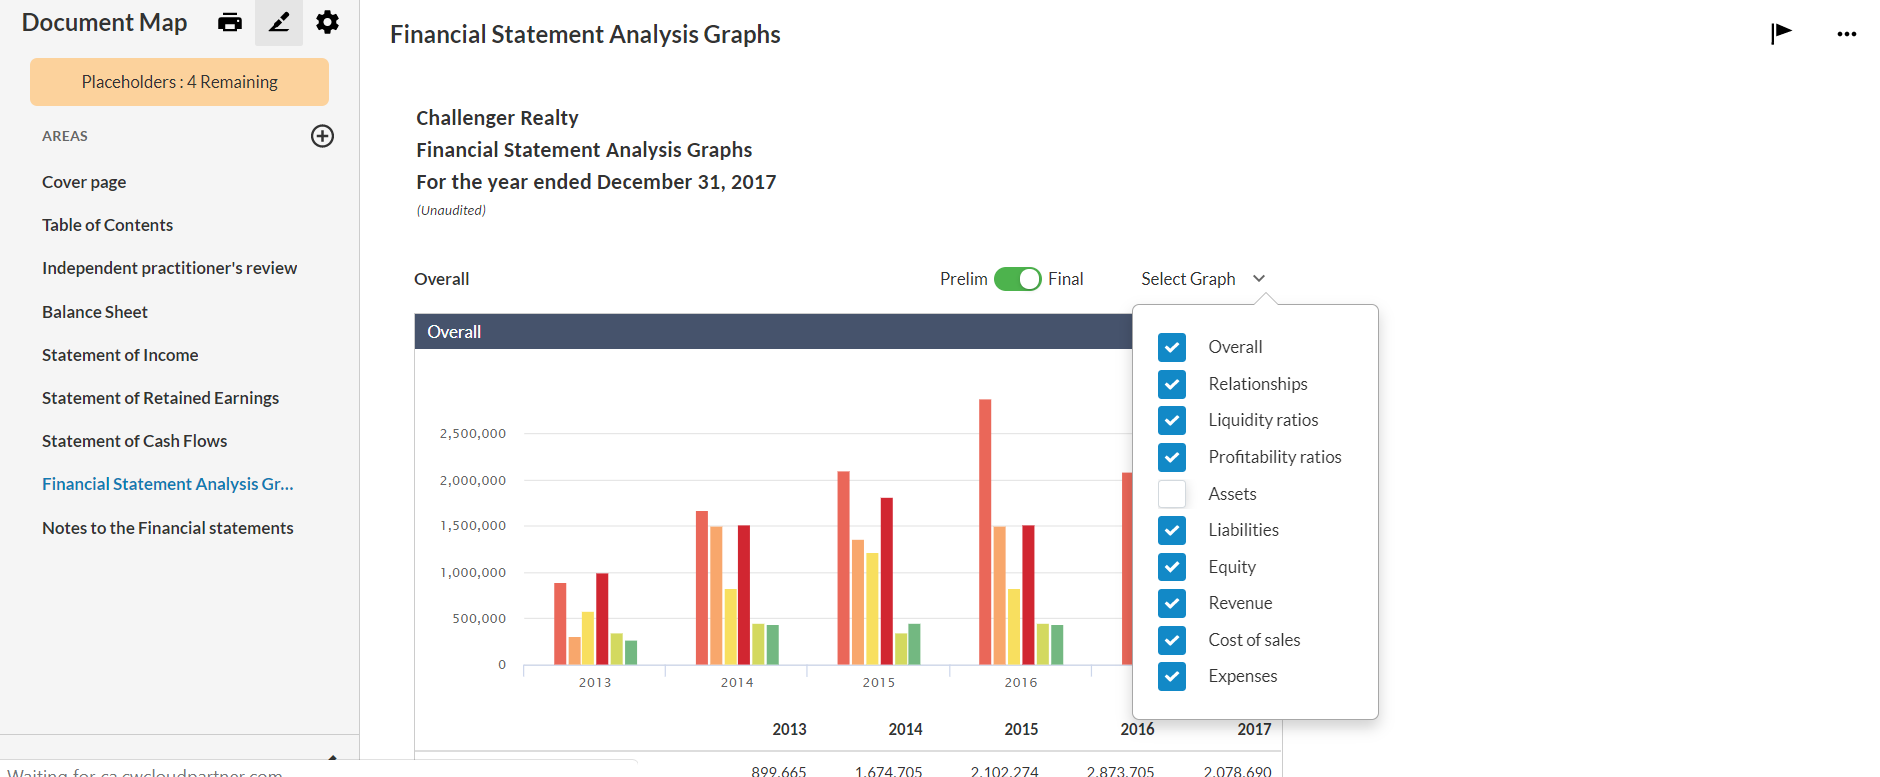 You can select which graphs to be displayed in the Financial Statements Analysis Graphs section.